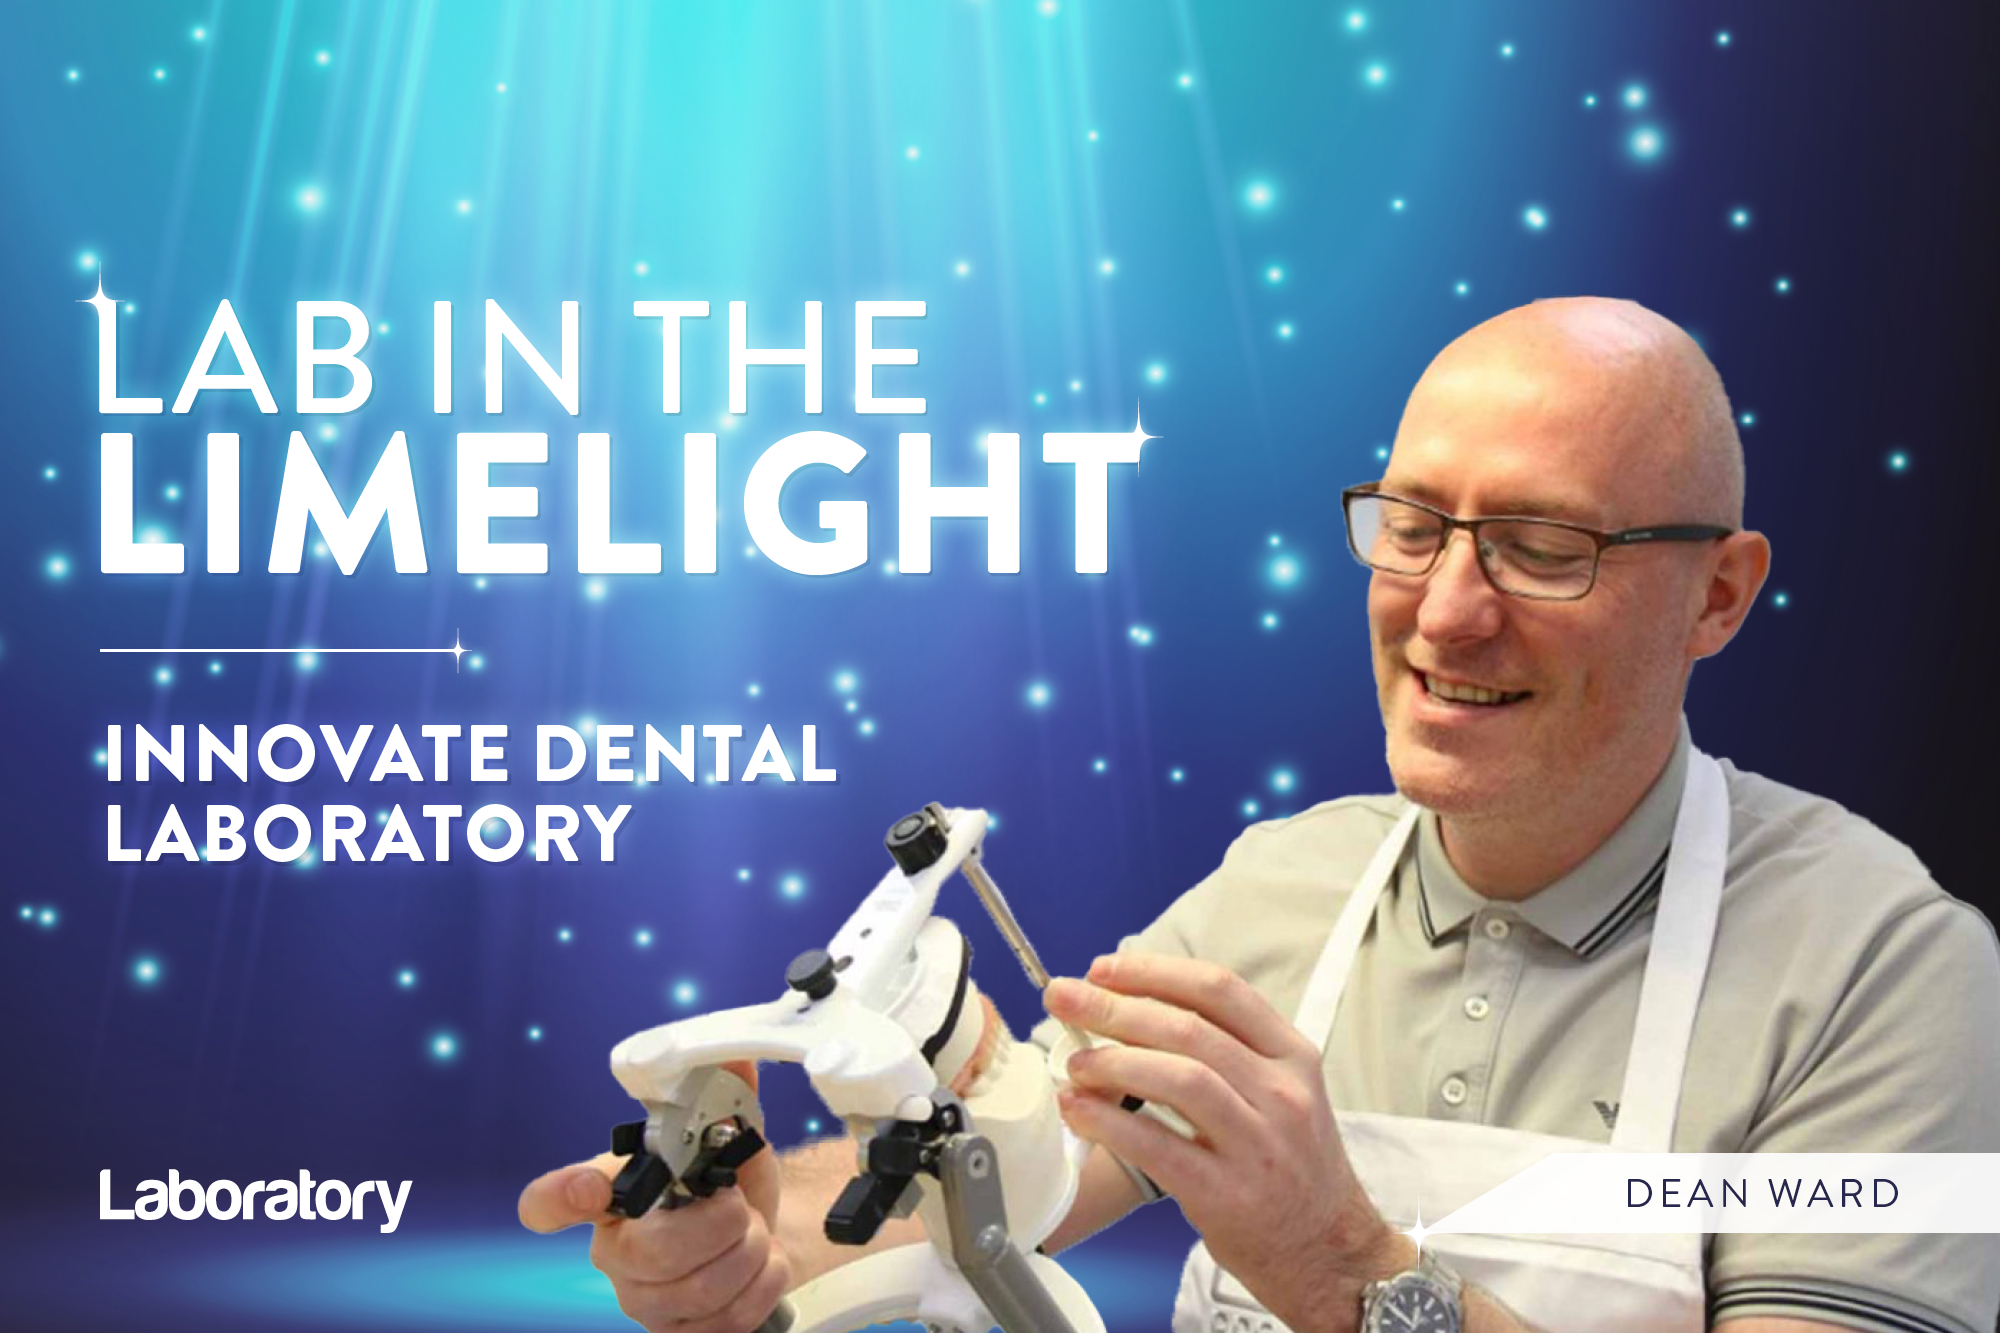 Dean Ward, director of Innovate Dental Laboratory, shares what he likes most about his job and his top tips for running a lab.